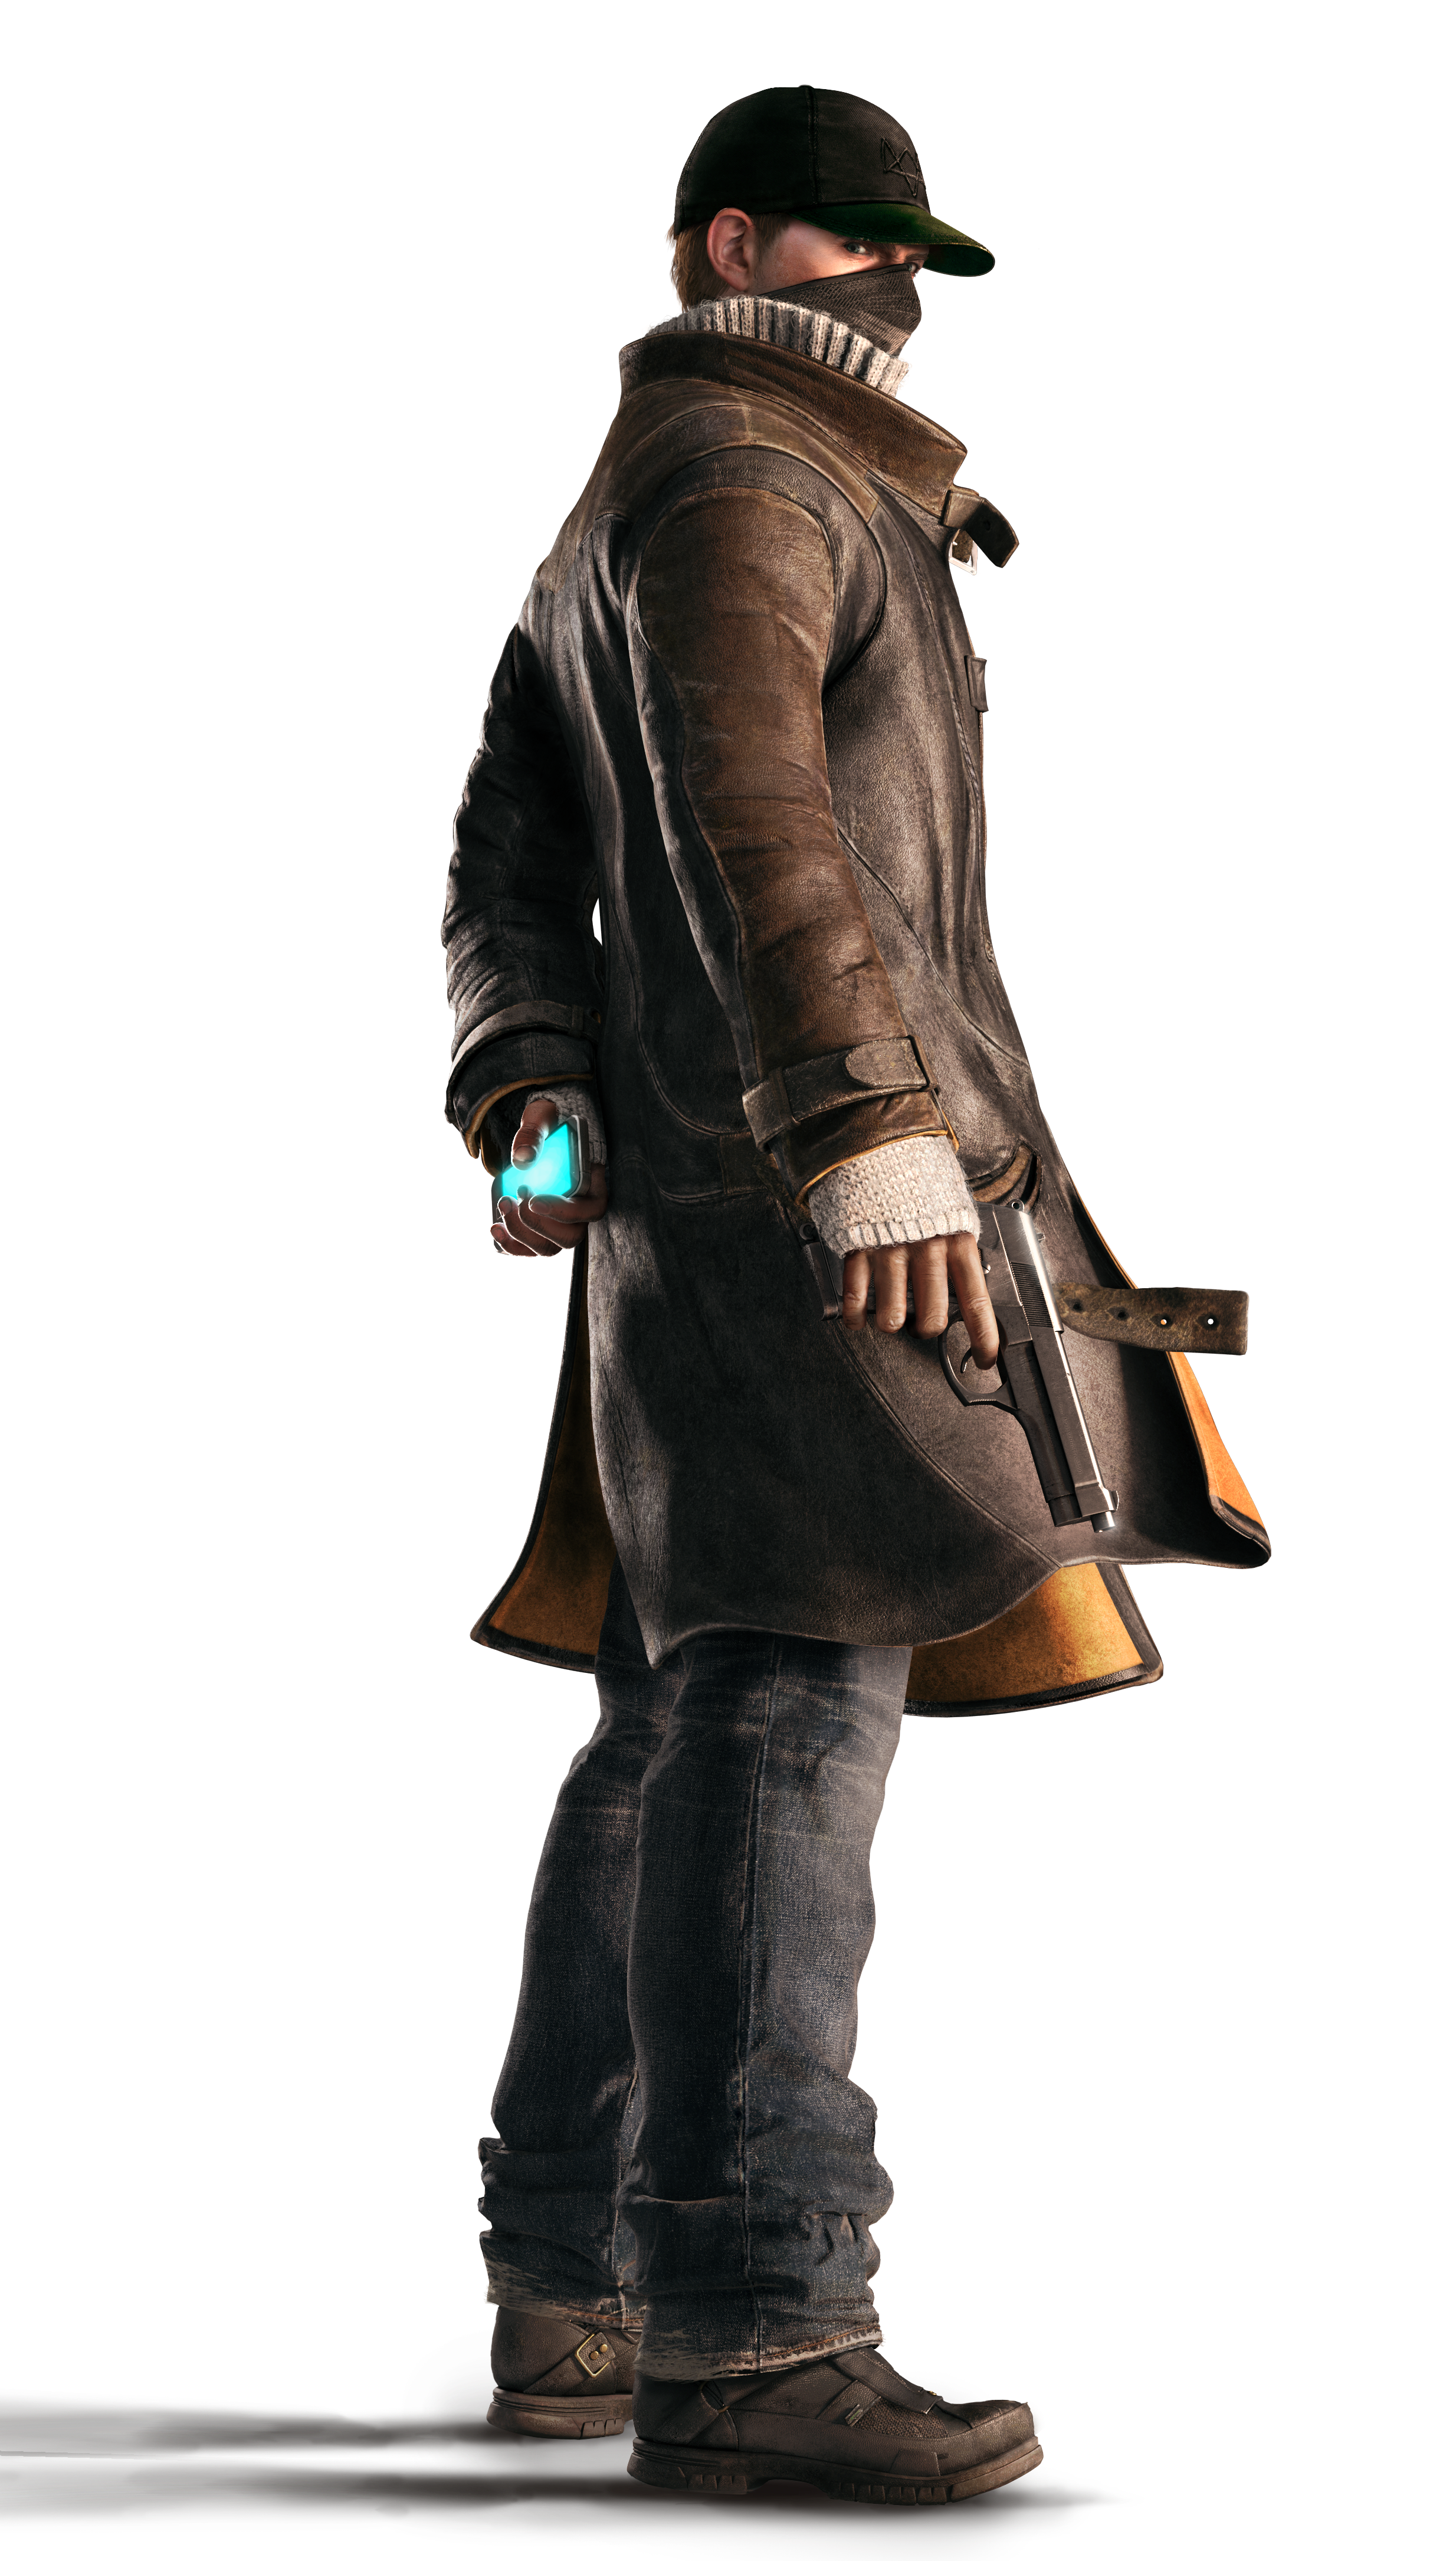 http://img3.wikia.nocookie.net/__cb20140416182135/watchdogscombined/images/e/e4/AidenRender.png